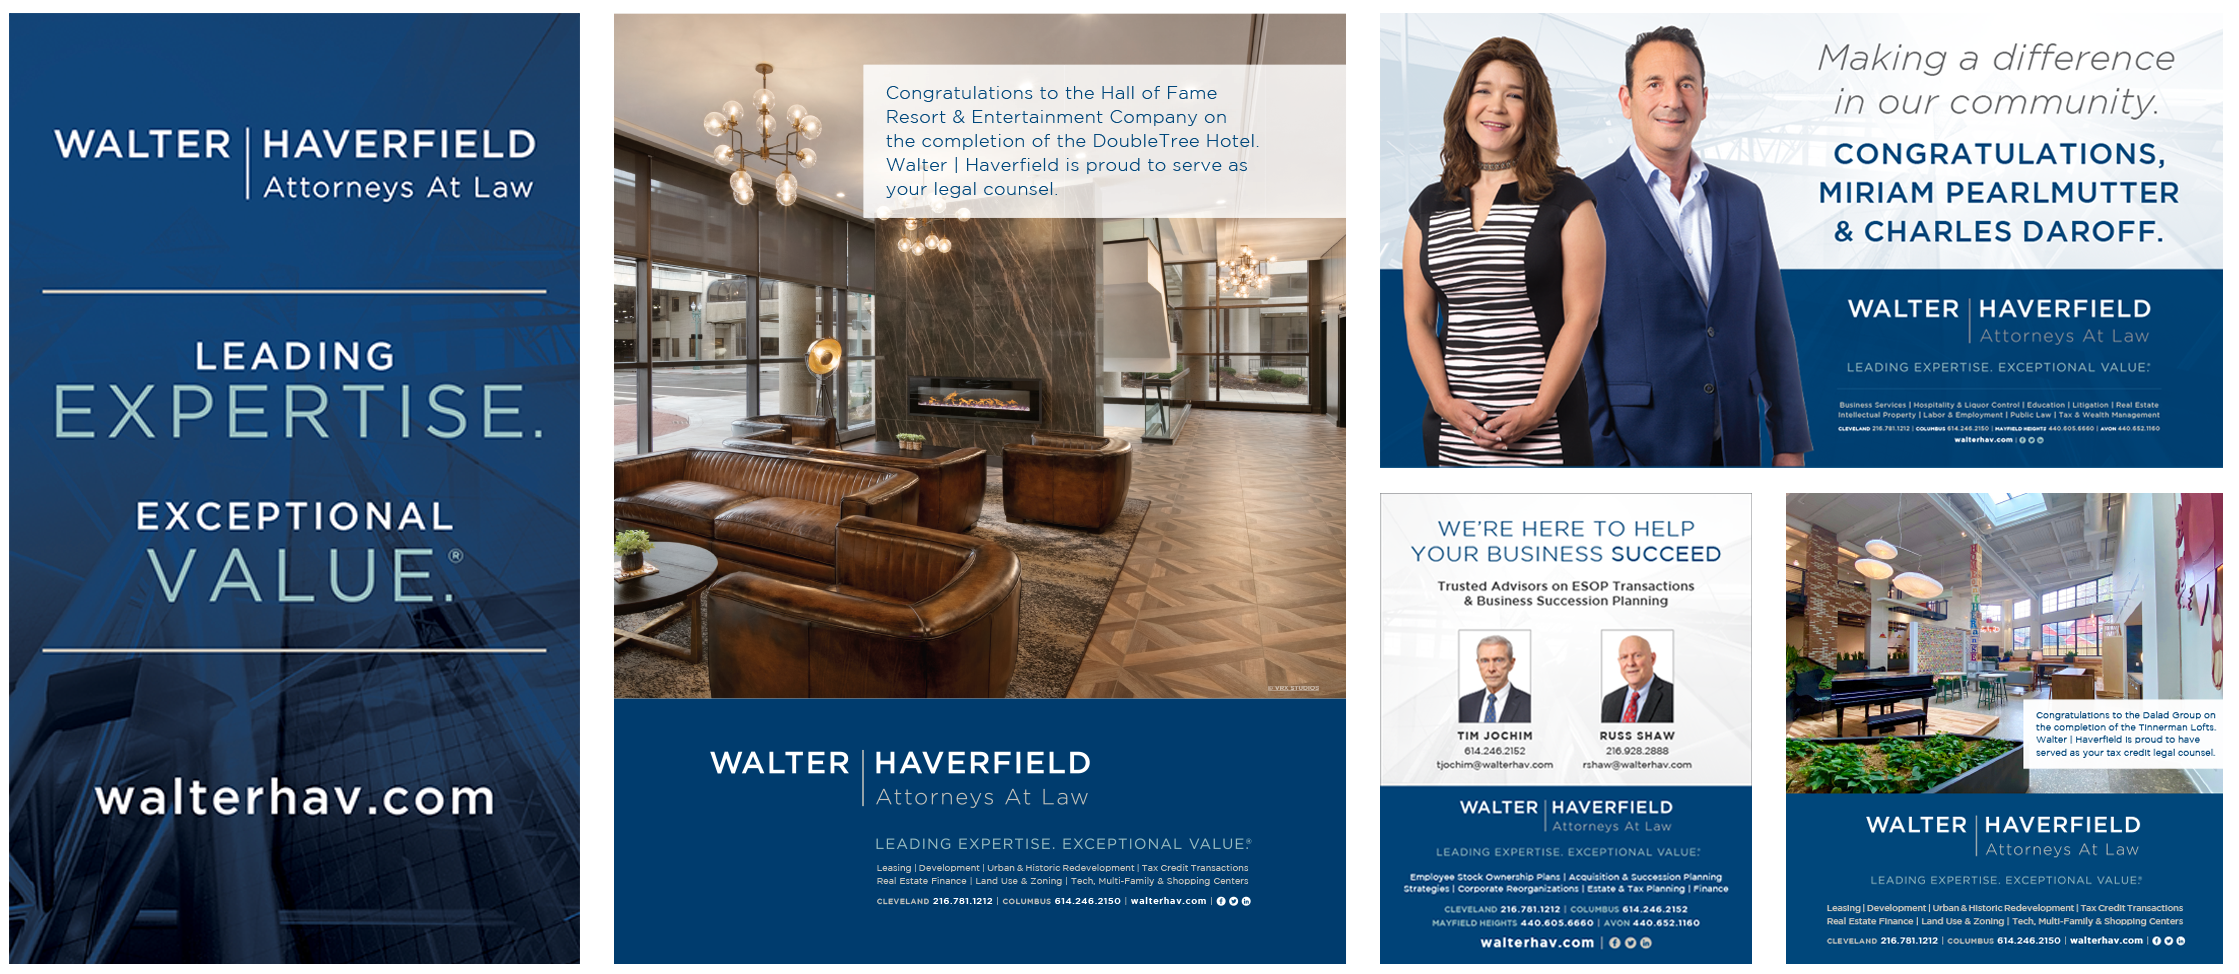 Social media ads for Walter Haverfield marketed in Cleveland.